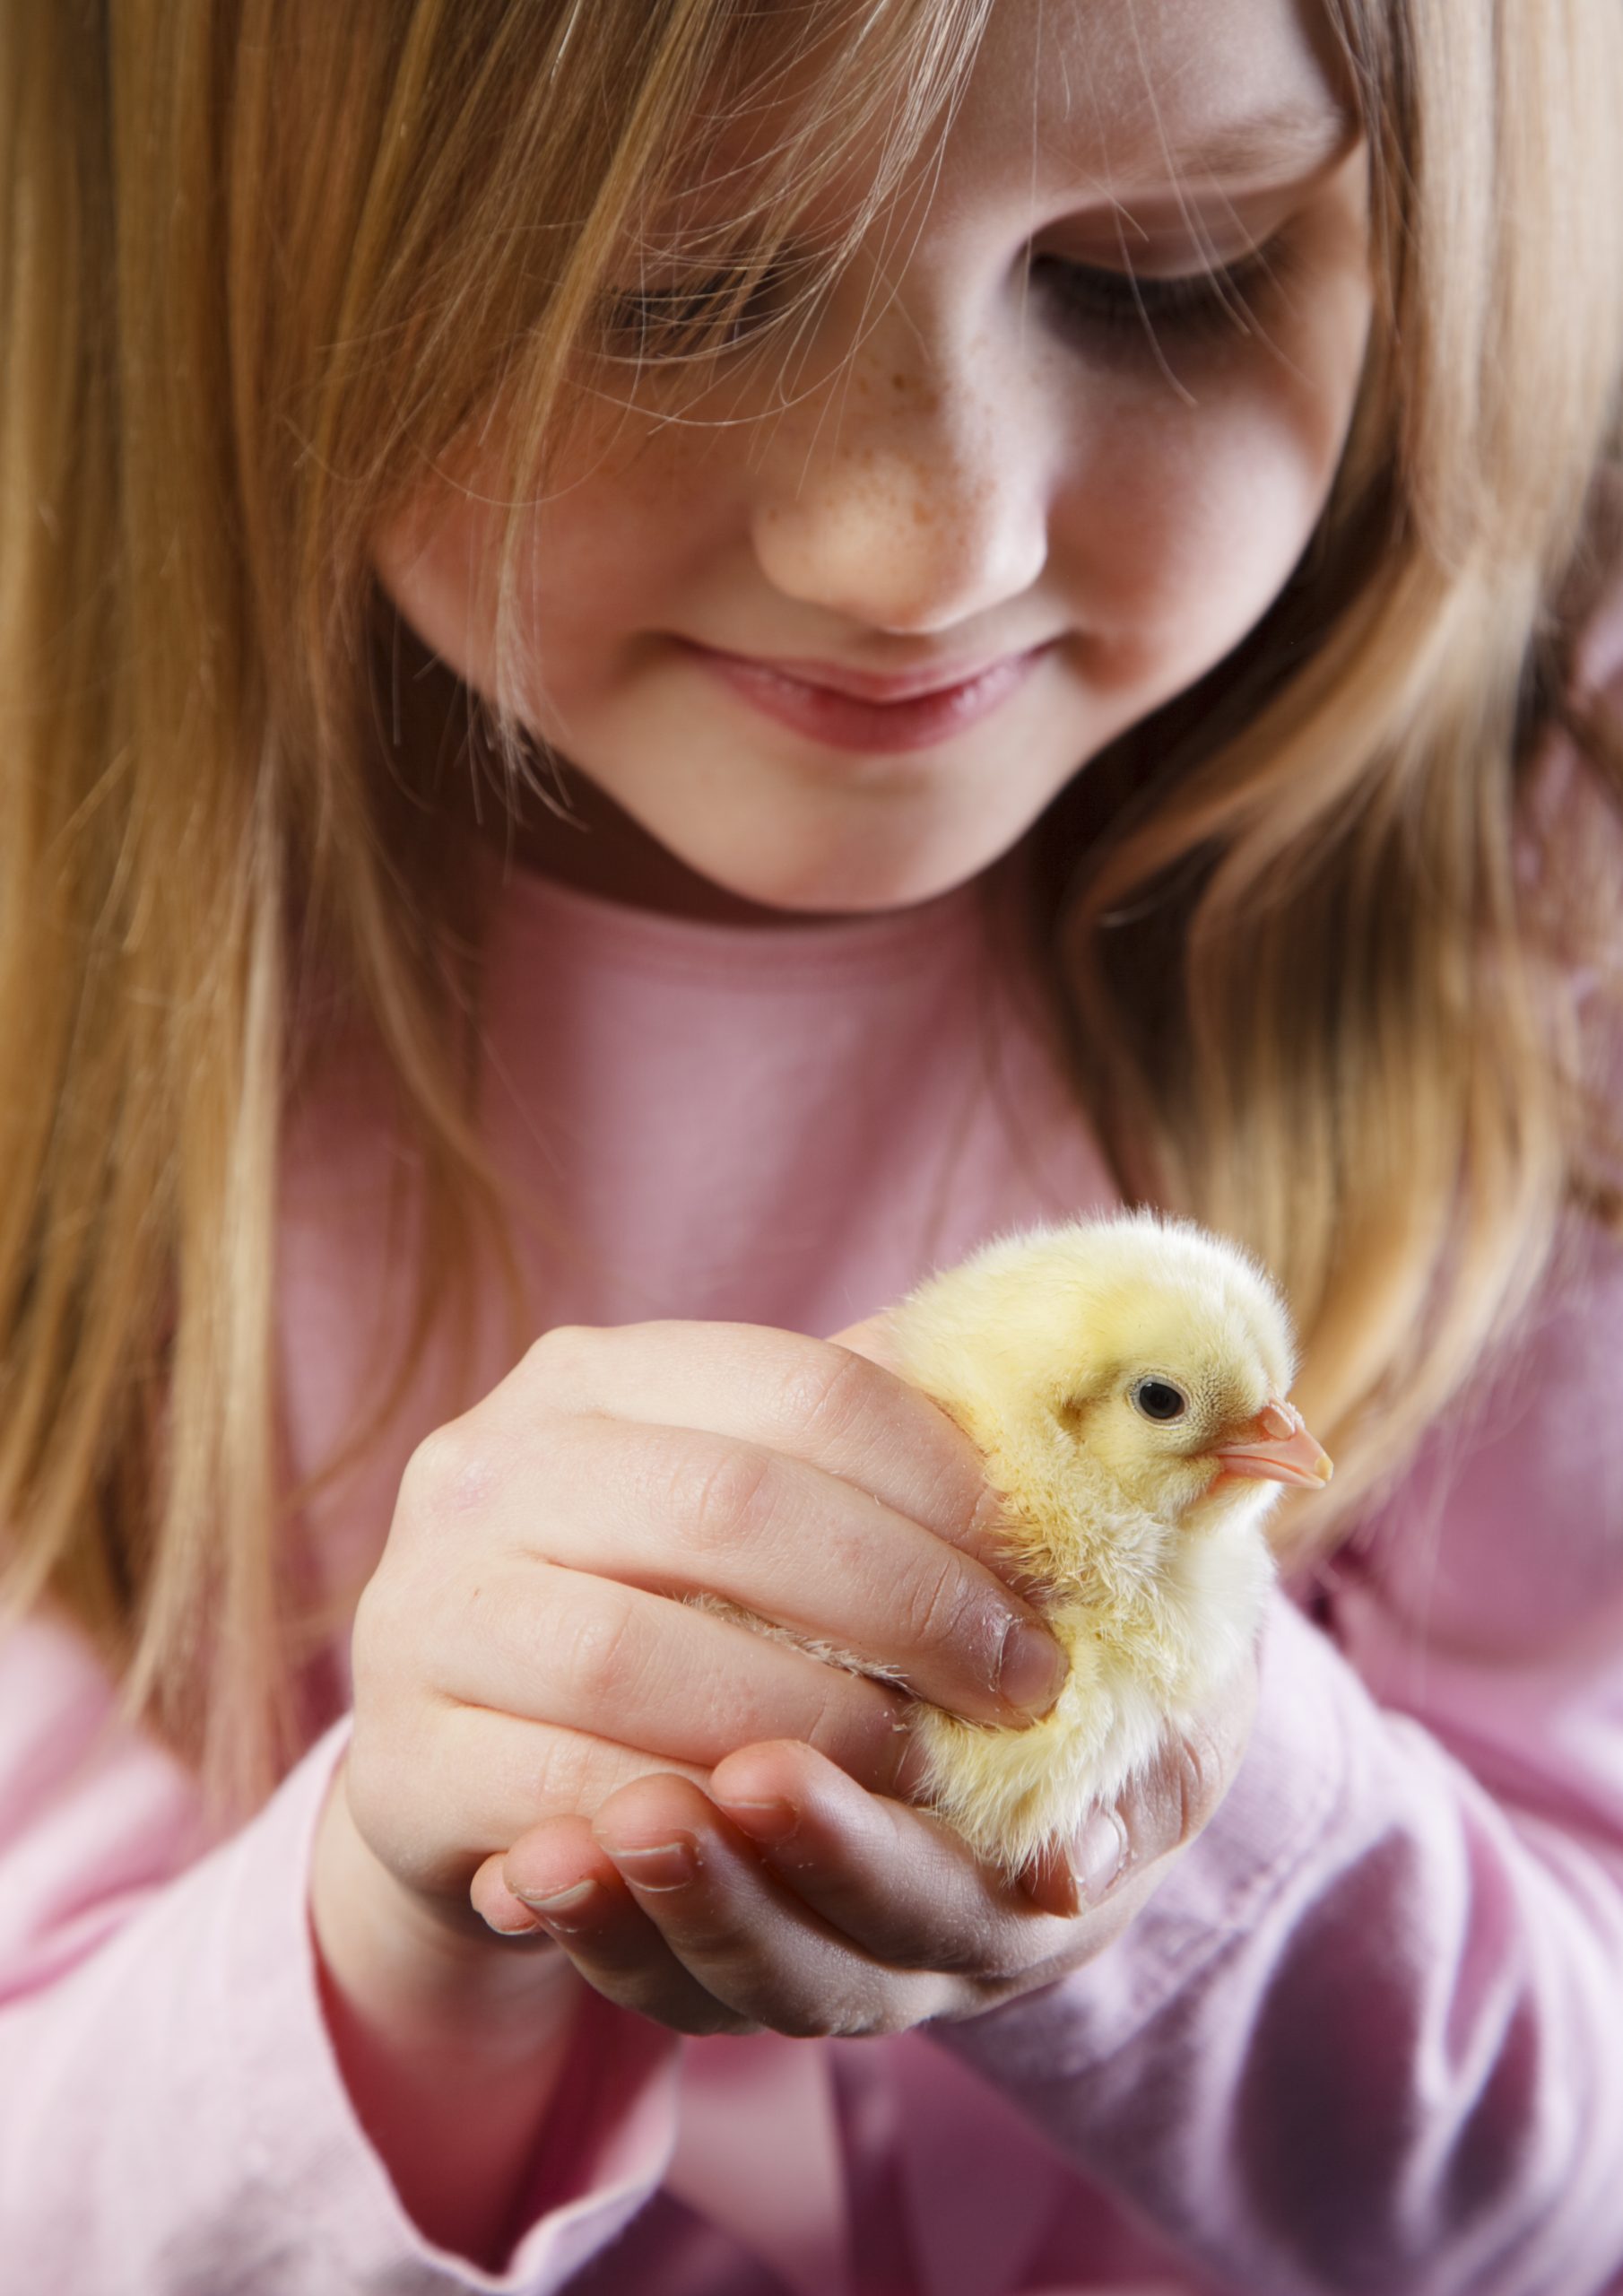 Private School in Southlake TX | Private School in Dallas | Student holding baby chick